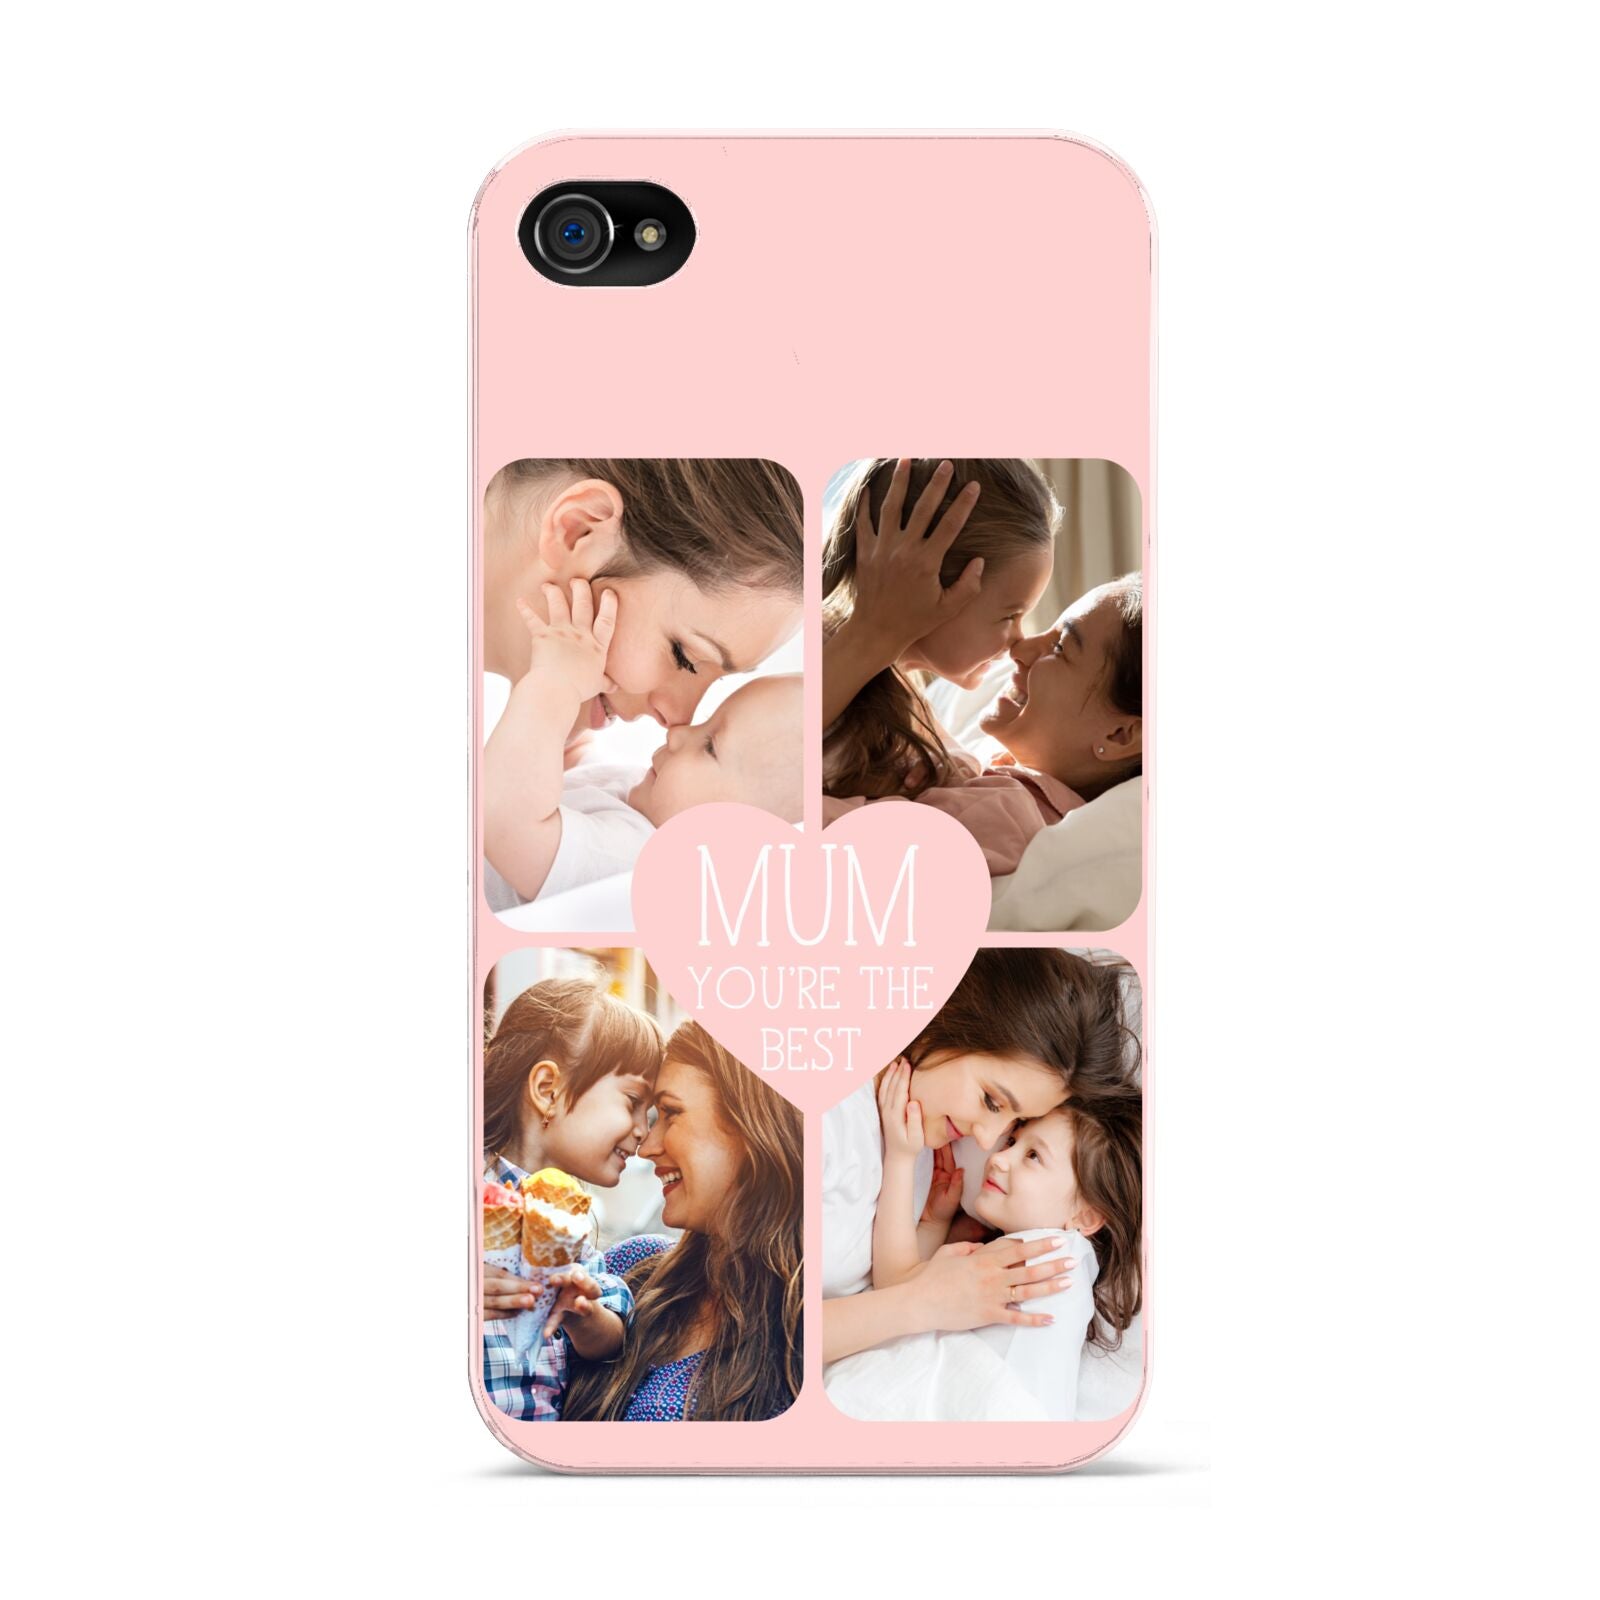 Mothers Day Four Photo Upload Apple iPhone 4s Case